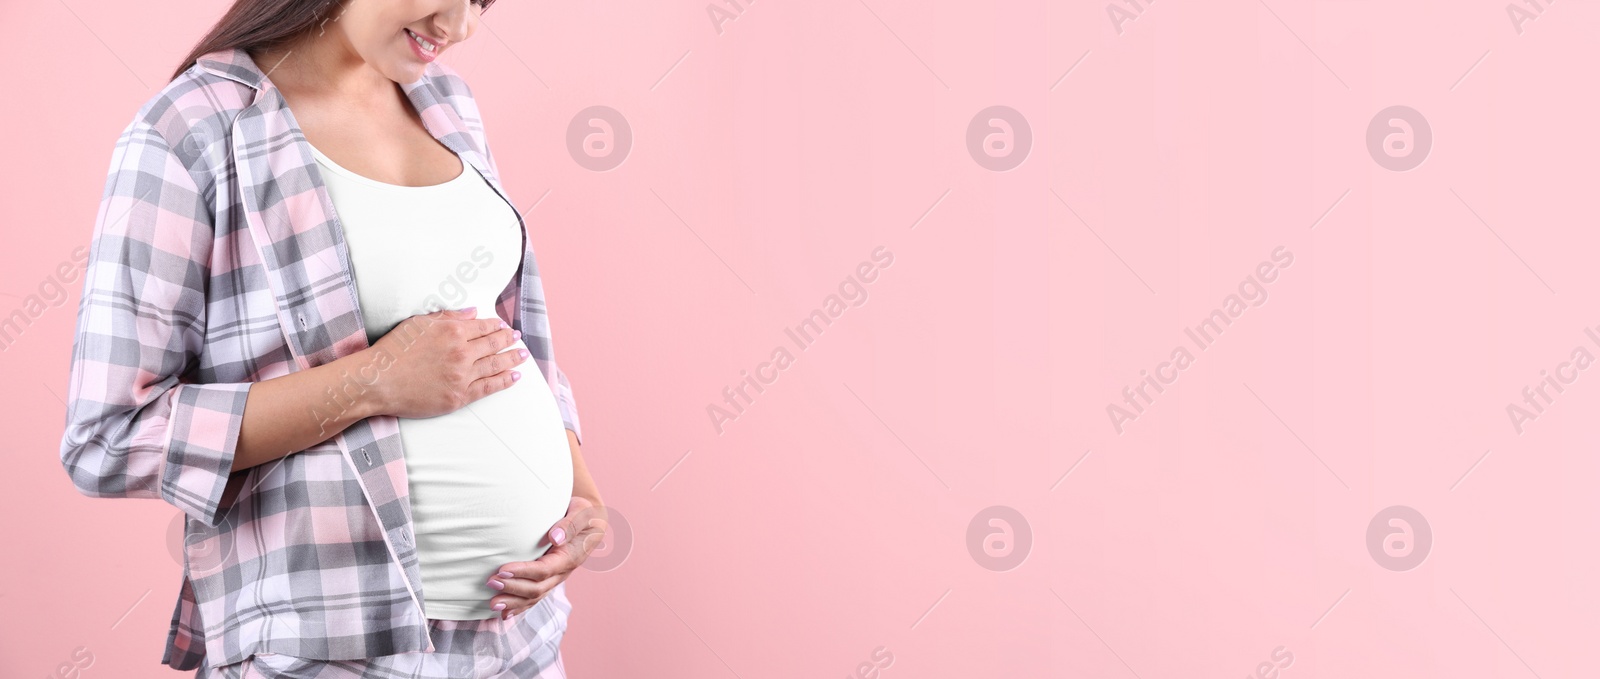 Image of Young pregnant woman holding hands on belly against color background, closeup view with space for text. Banner design